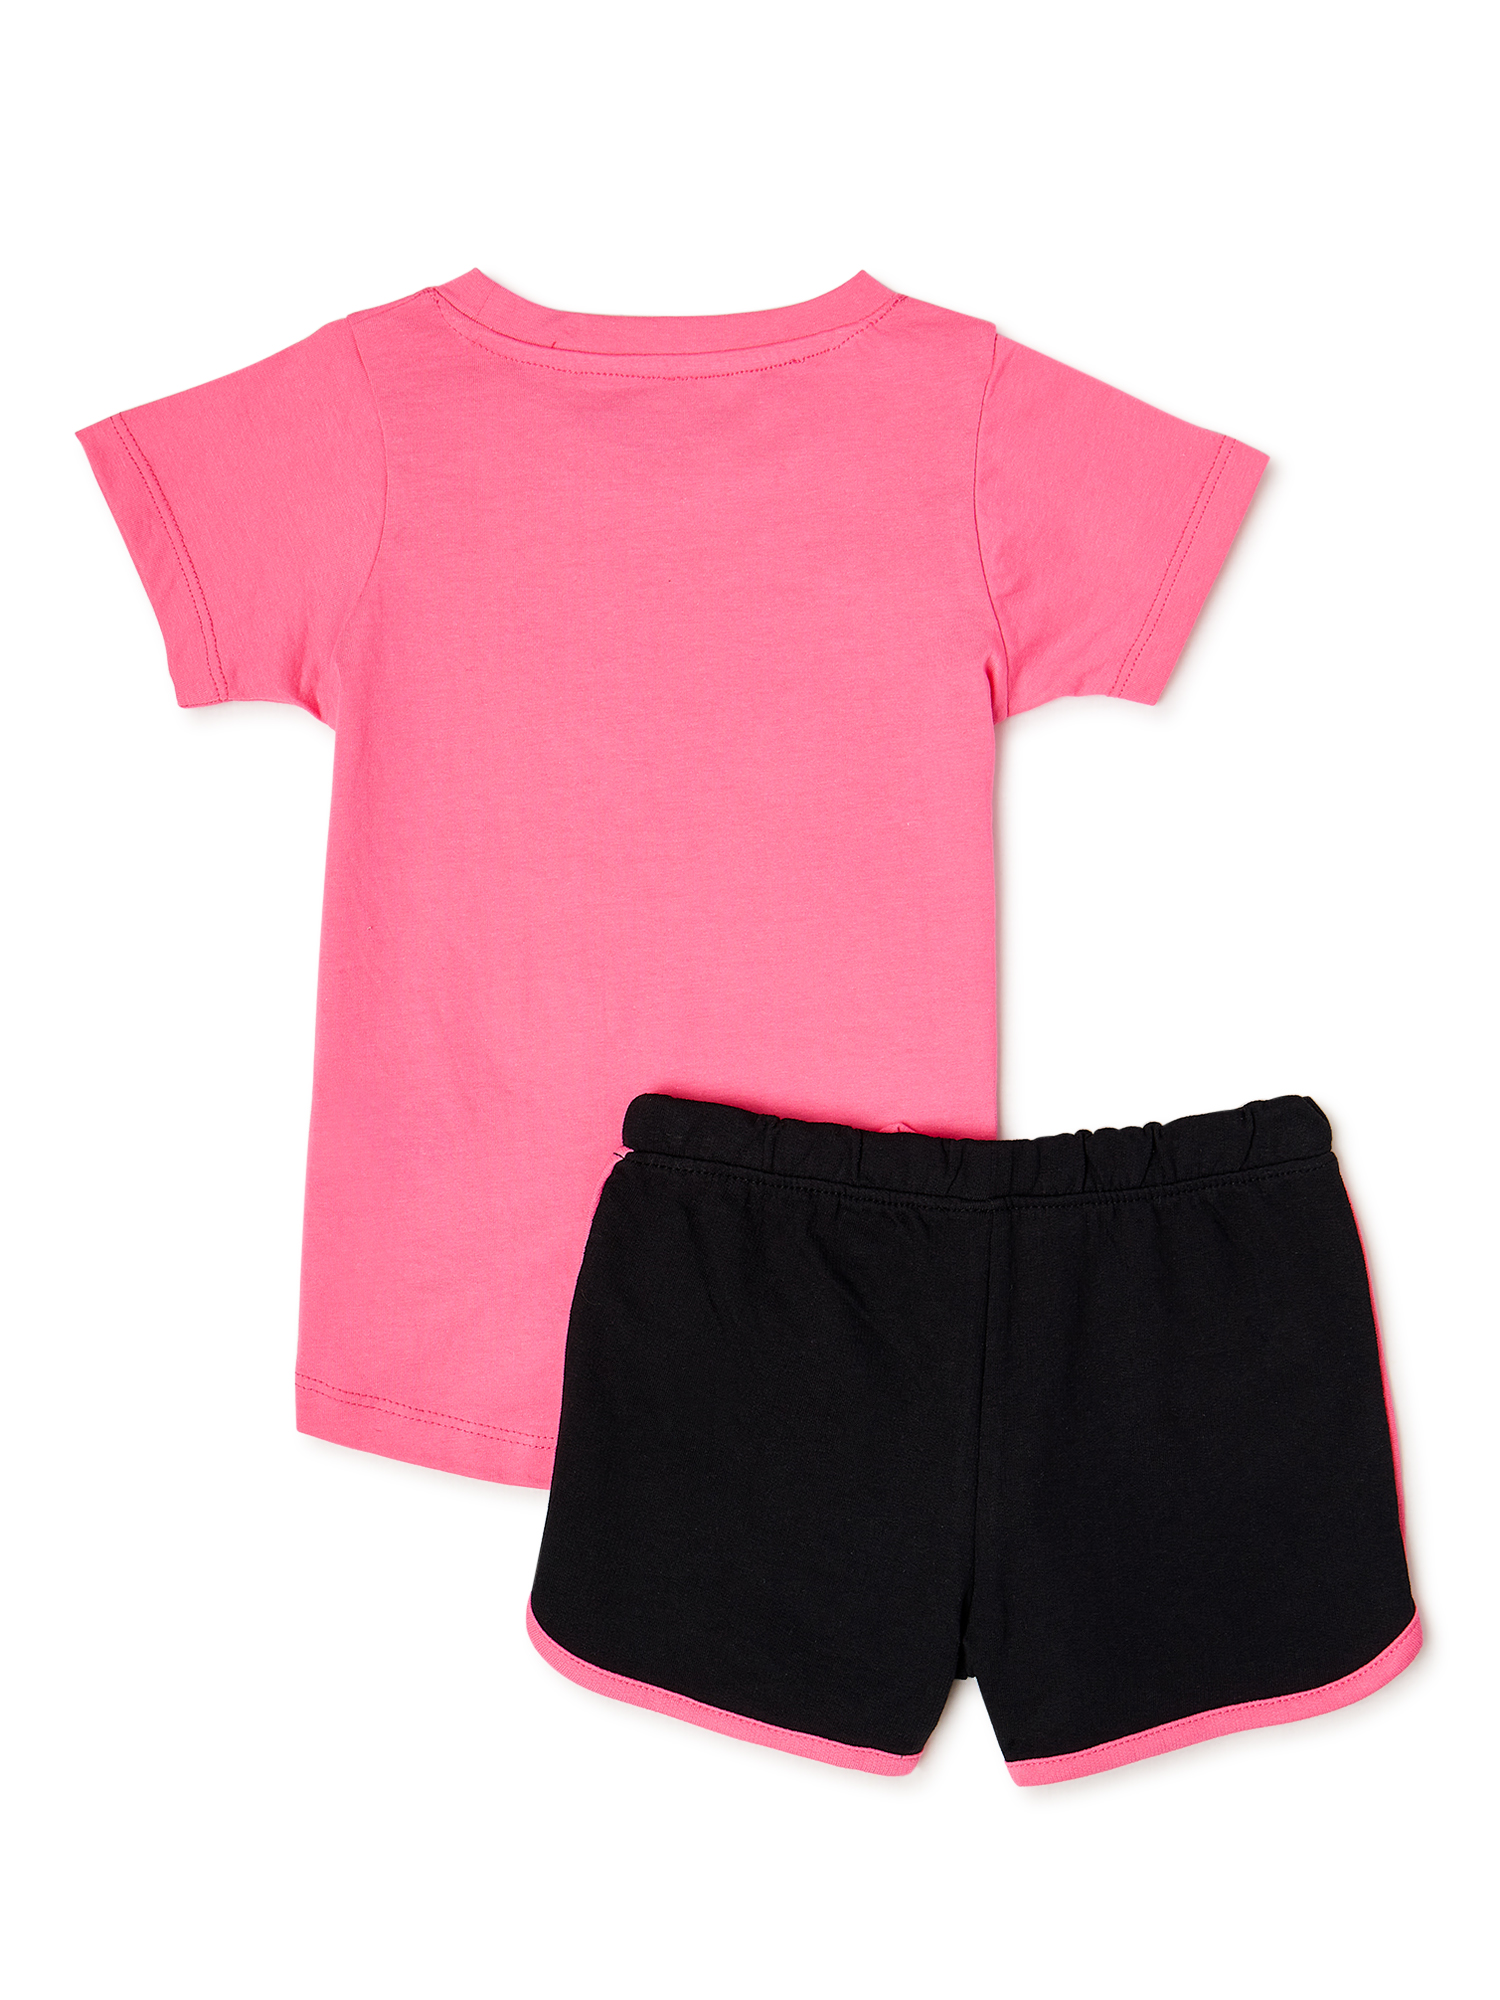 Dreamstar Girls Tie Front Short Sleeve Graphic T Shirt And Dolphin Shorts 2 Piece Outfit Set